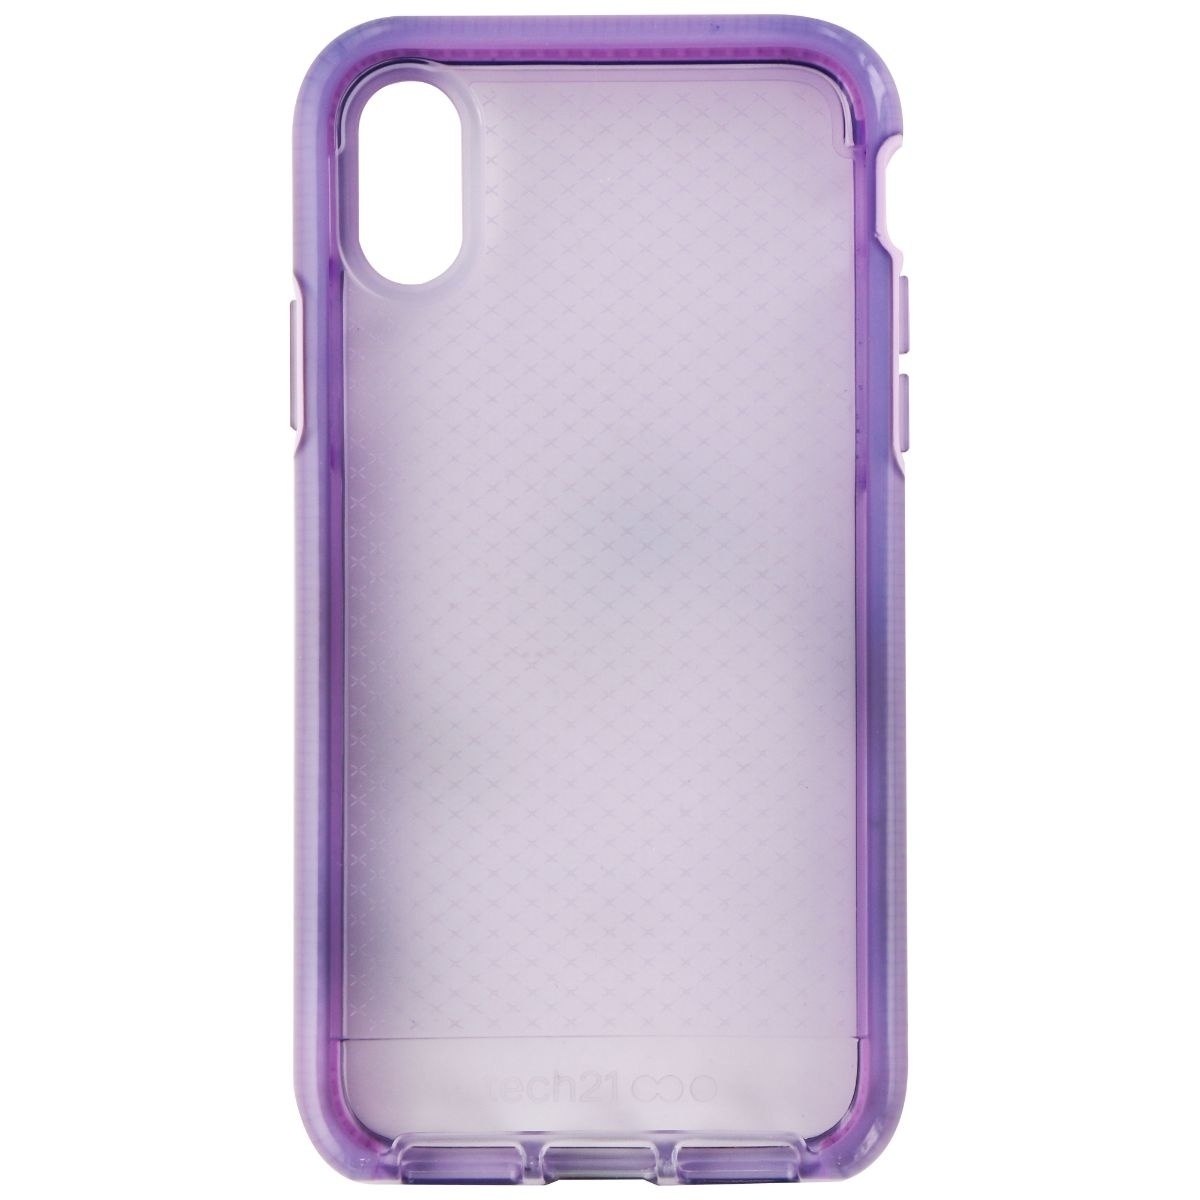 Tech21 Evo Check Series Flexible Gel Case For Apple IPhone Xs/X - Orchid Purple